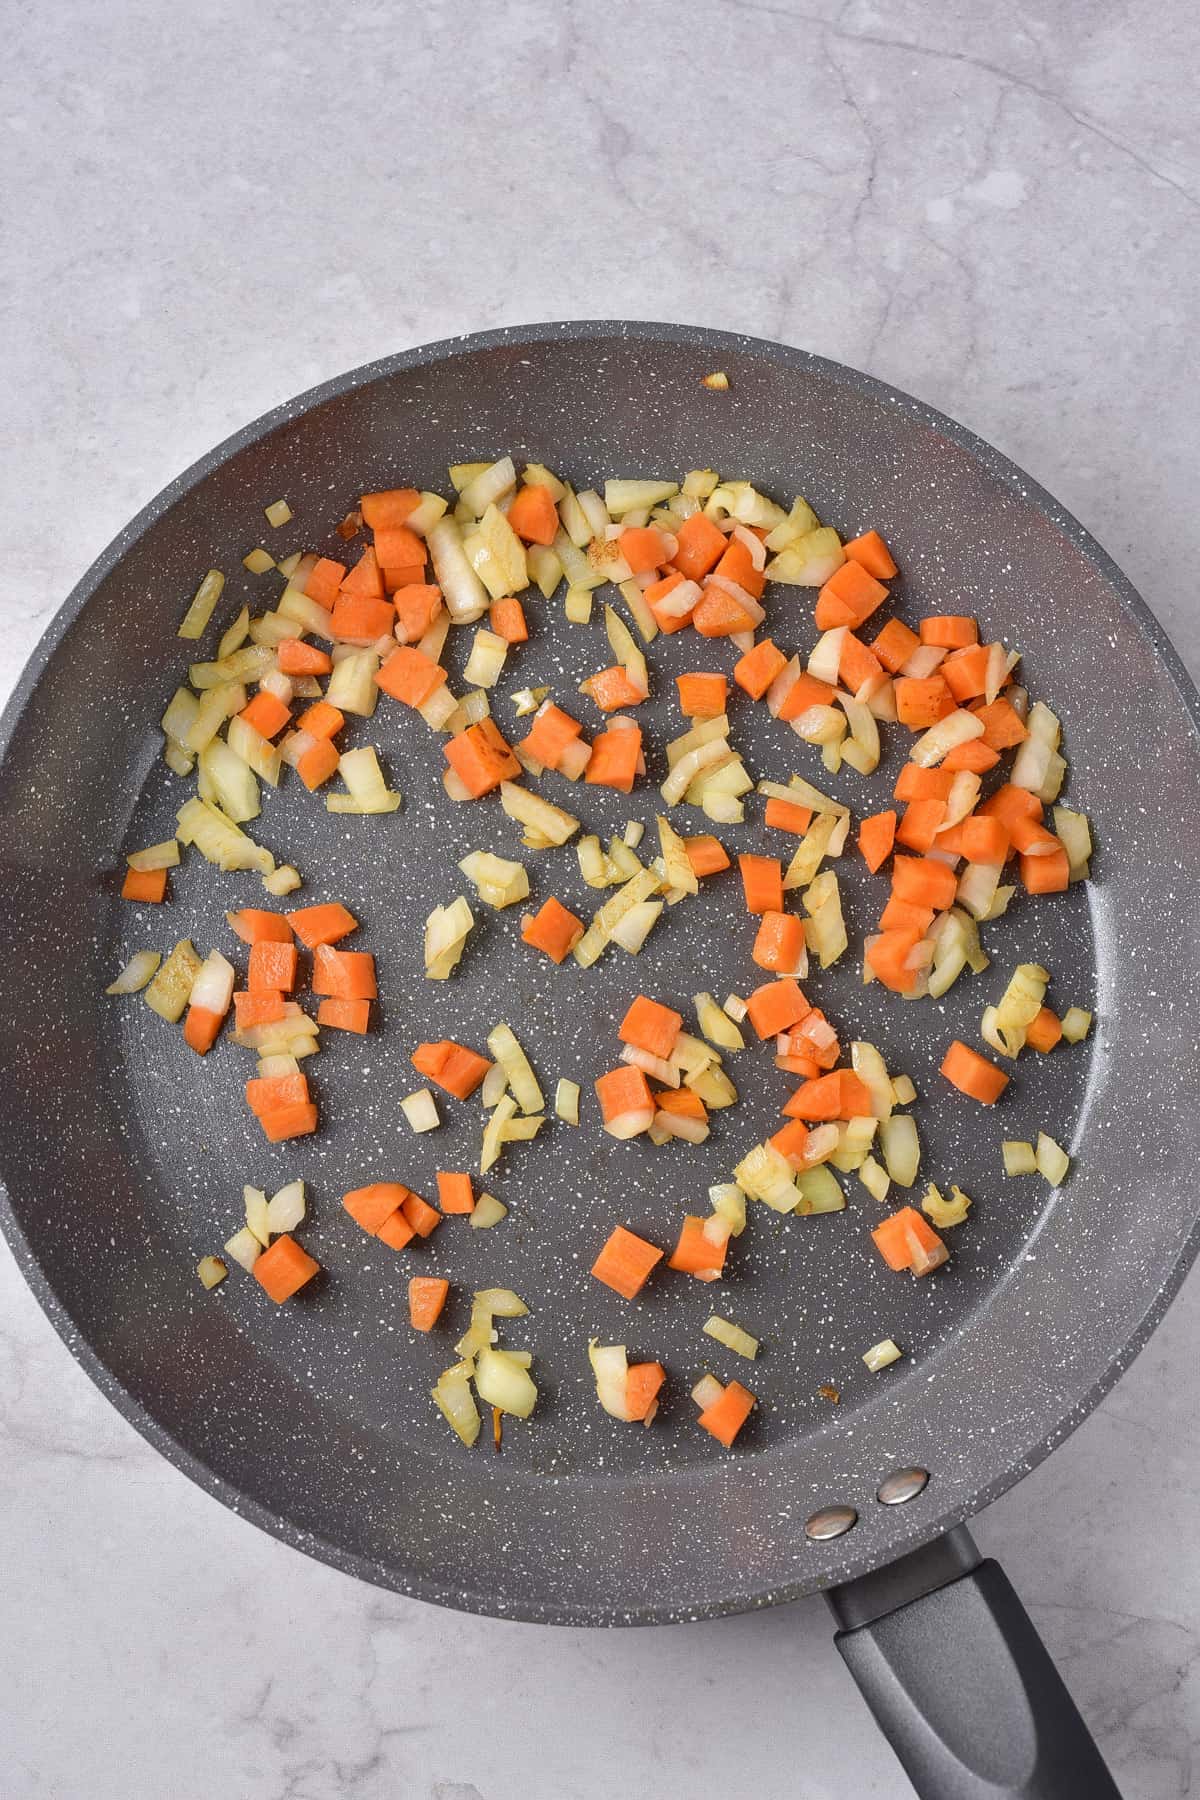 Cooking onion, carrot and garlic in a pan.